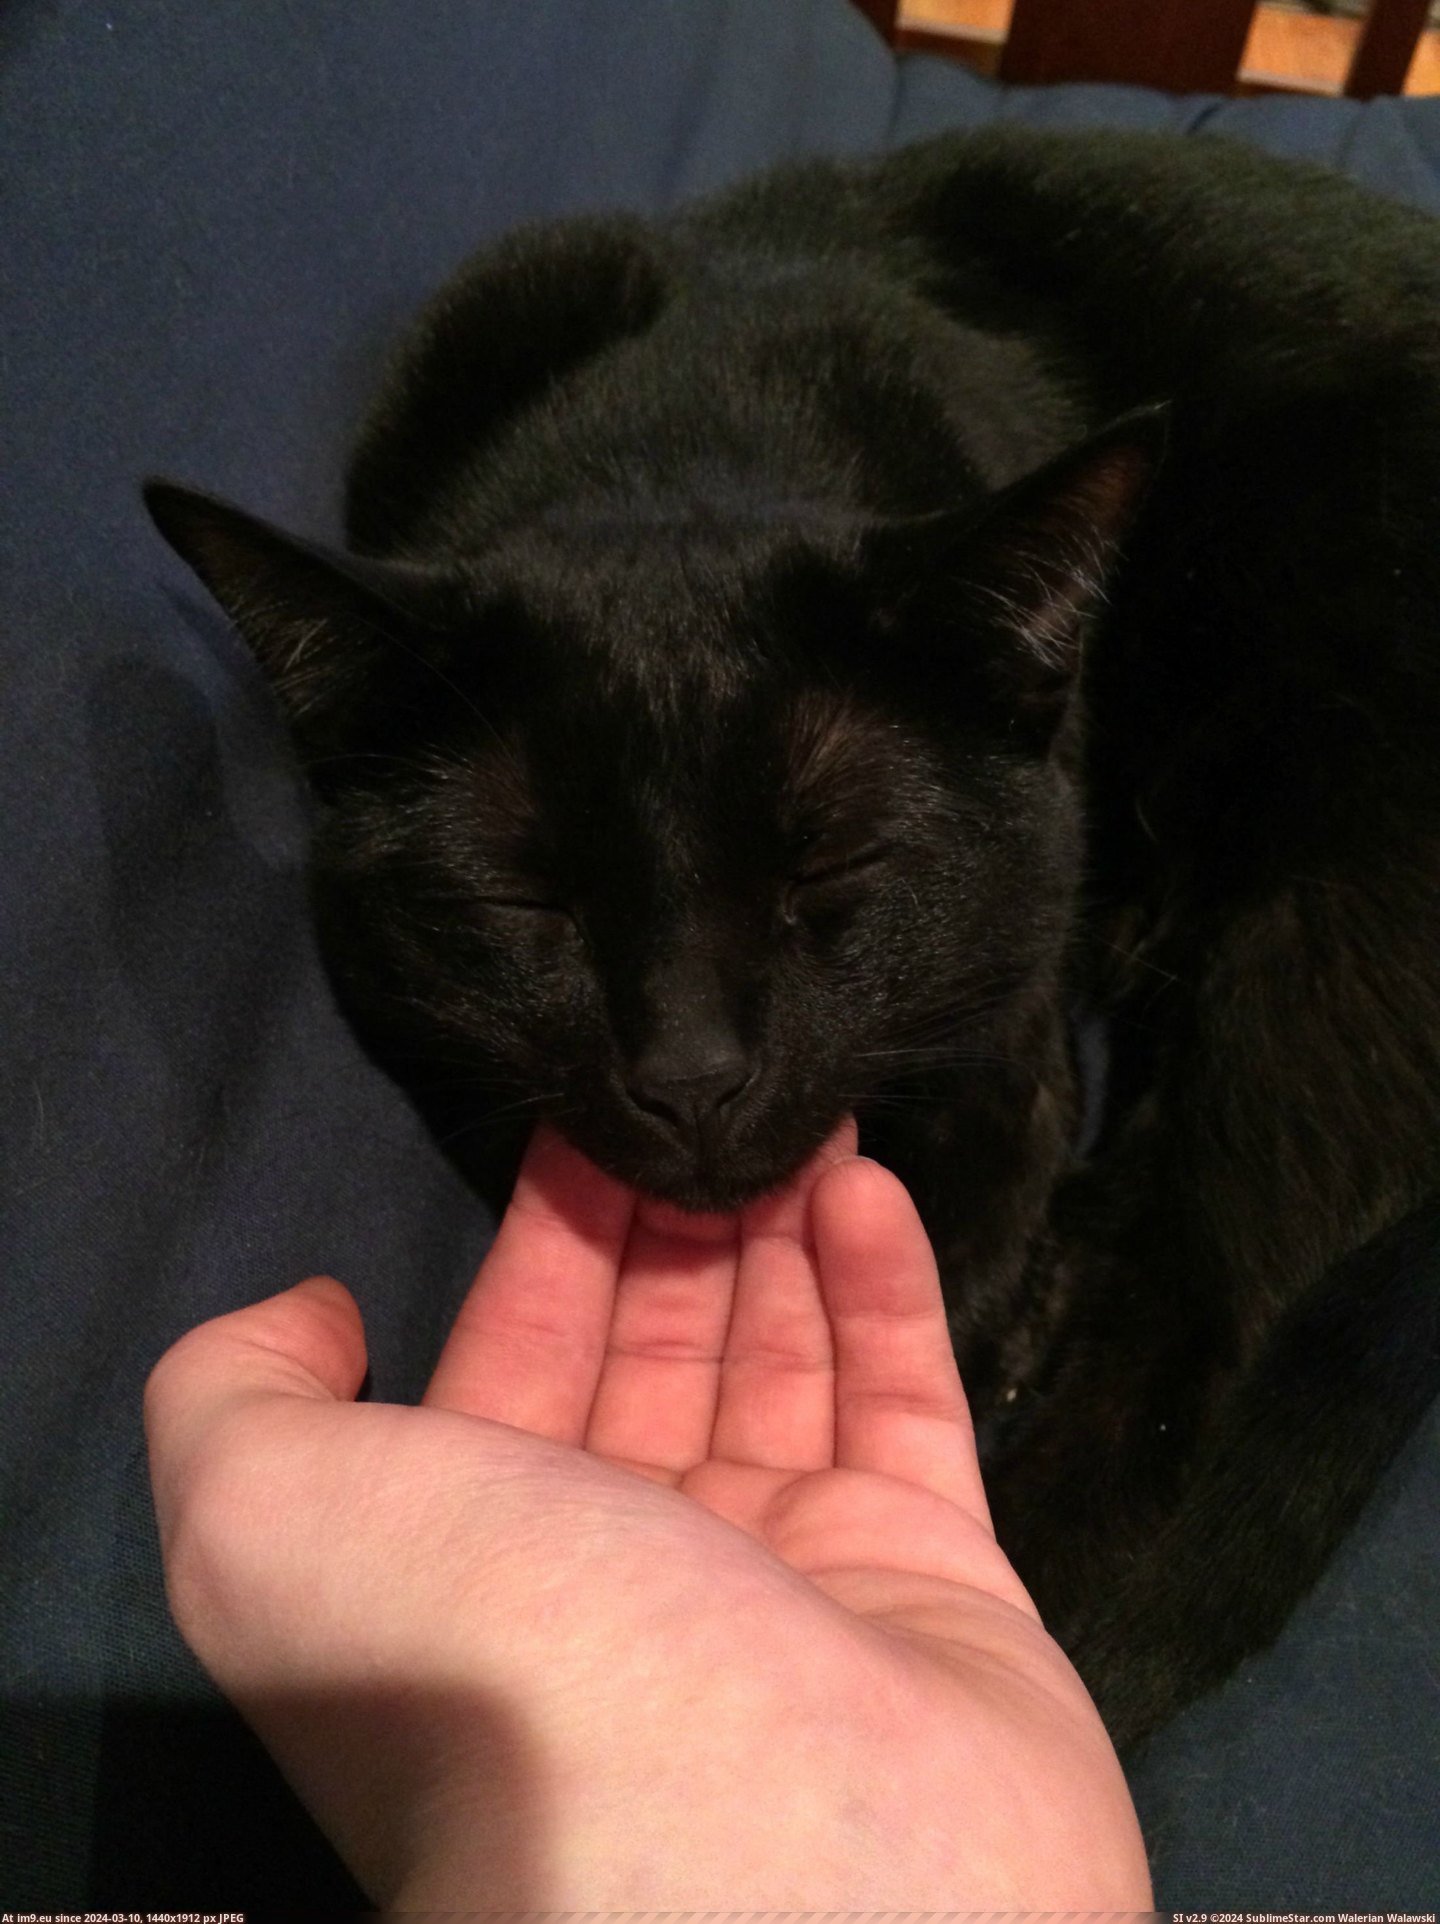 #Cats #Loves #Chin #Charlie #Scratches [Cats] Charlie LOVES chin scratches... Pic. (Изображение из альбом My r/CATS favs))